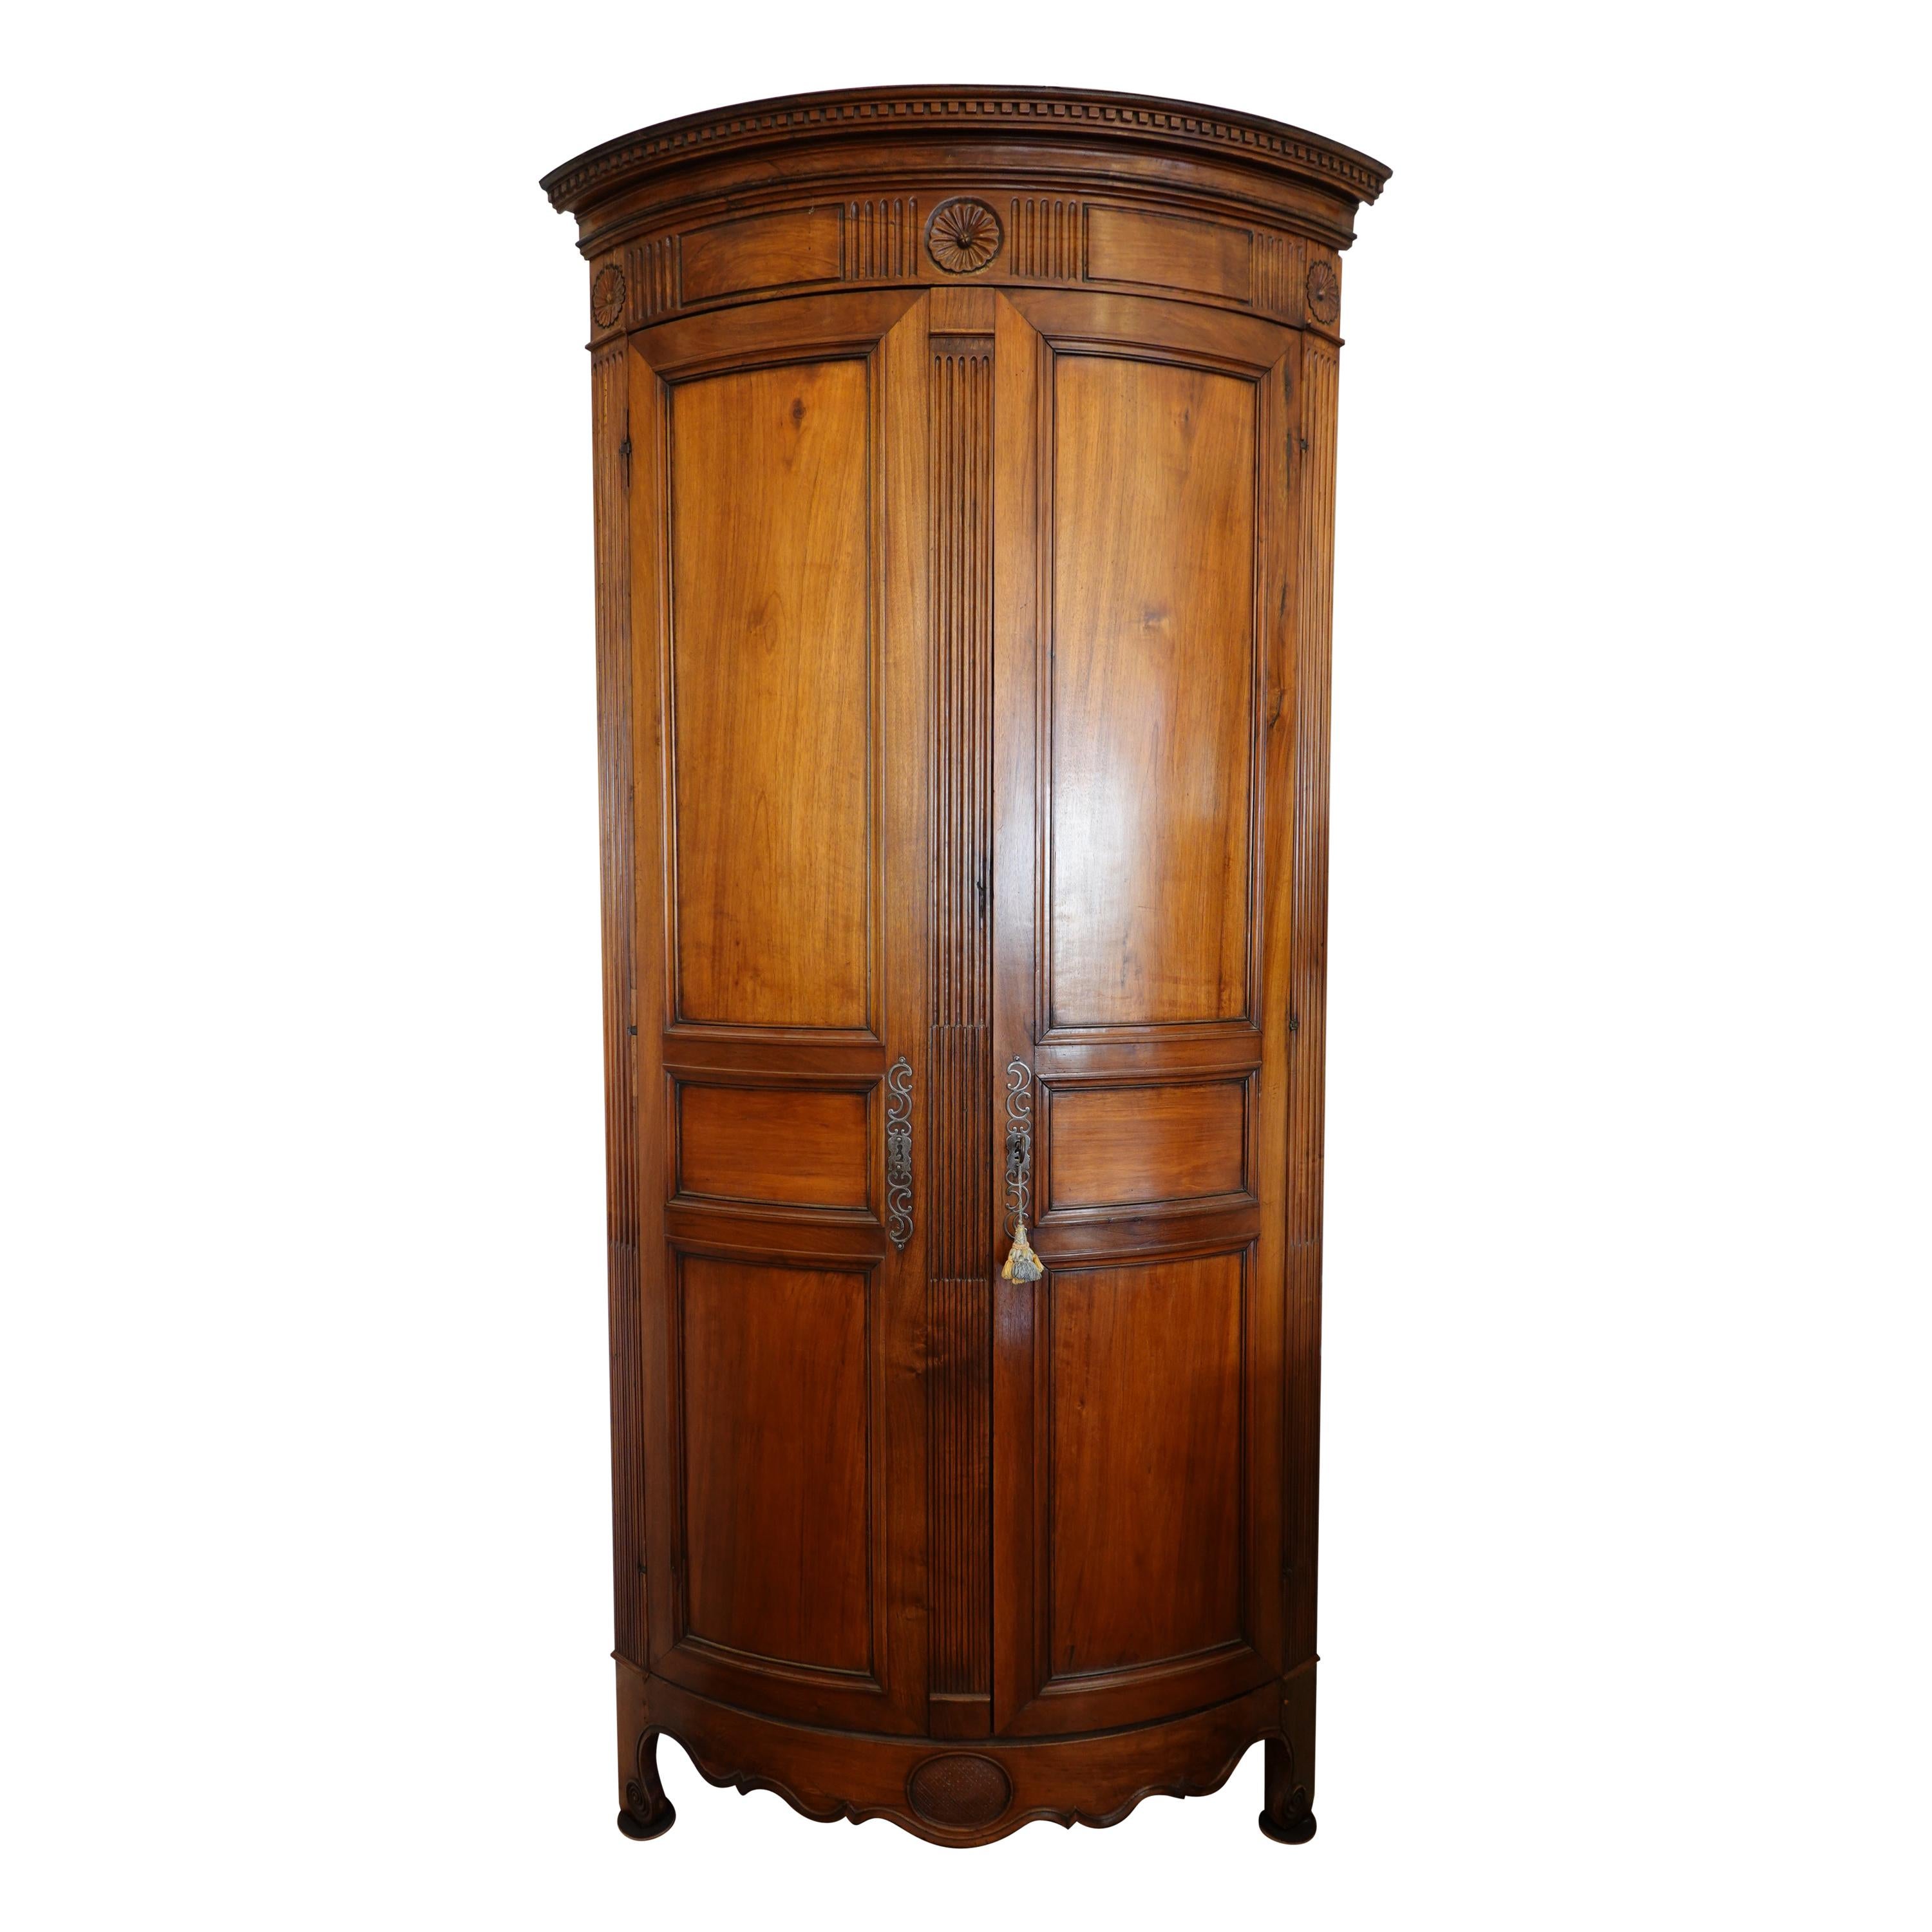 Louis XVI Period Corner Cabinet or Encoignure in Walnut with Curved Facade For Sale